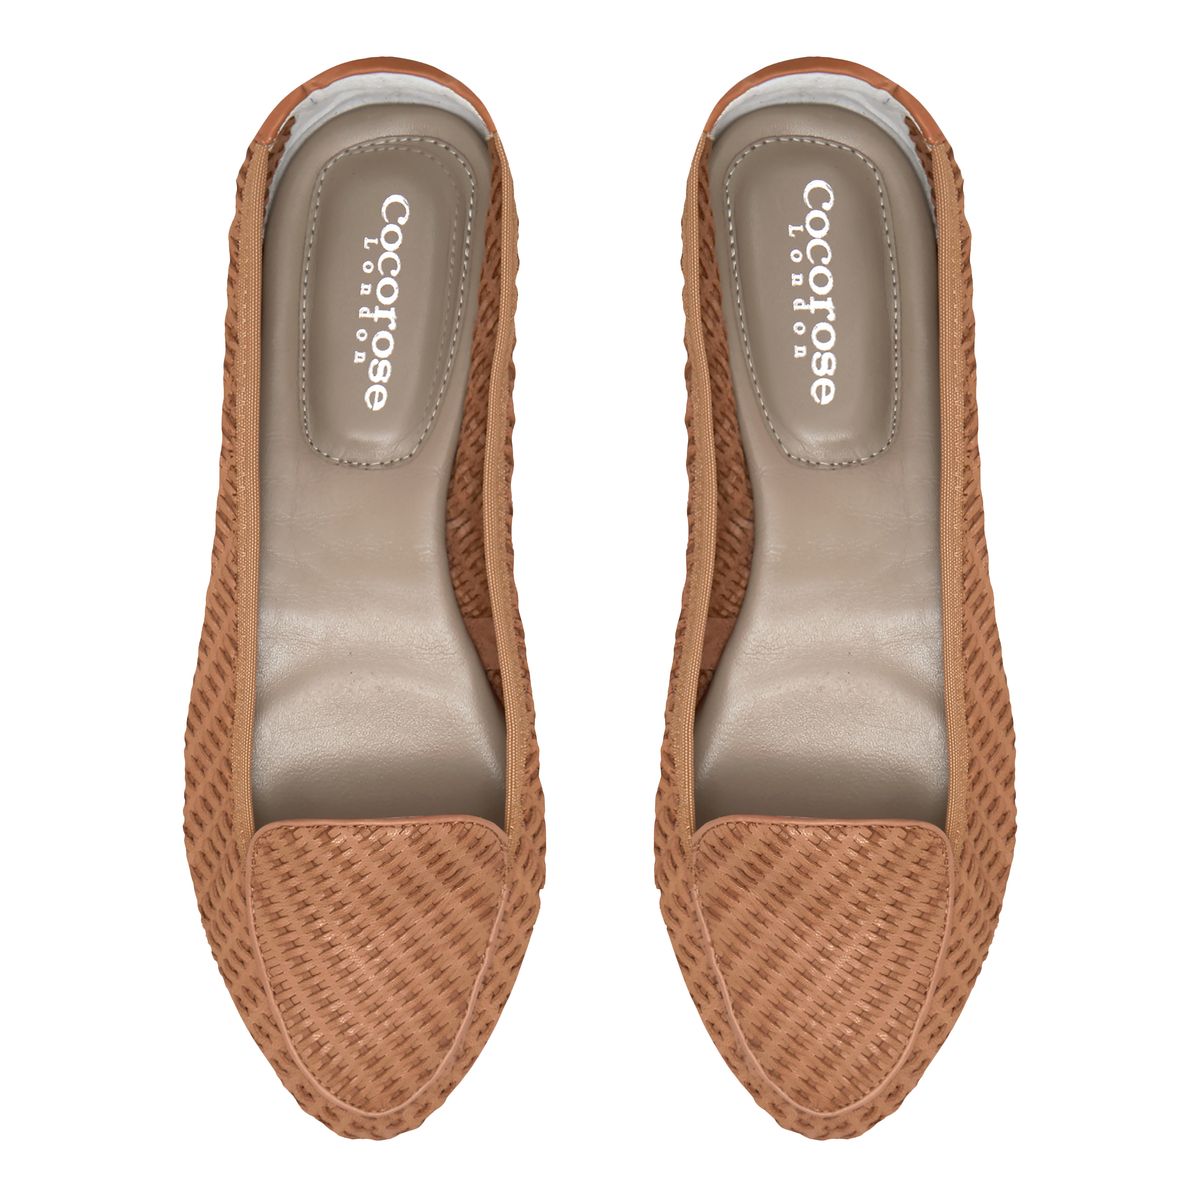 Tan coloured woven leather loafers from Cocorose London